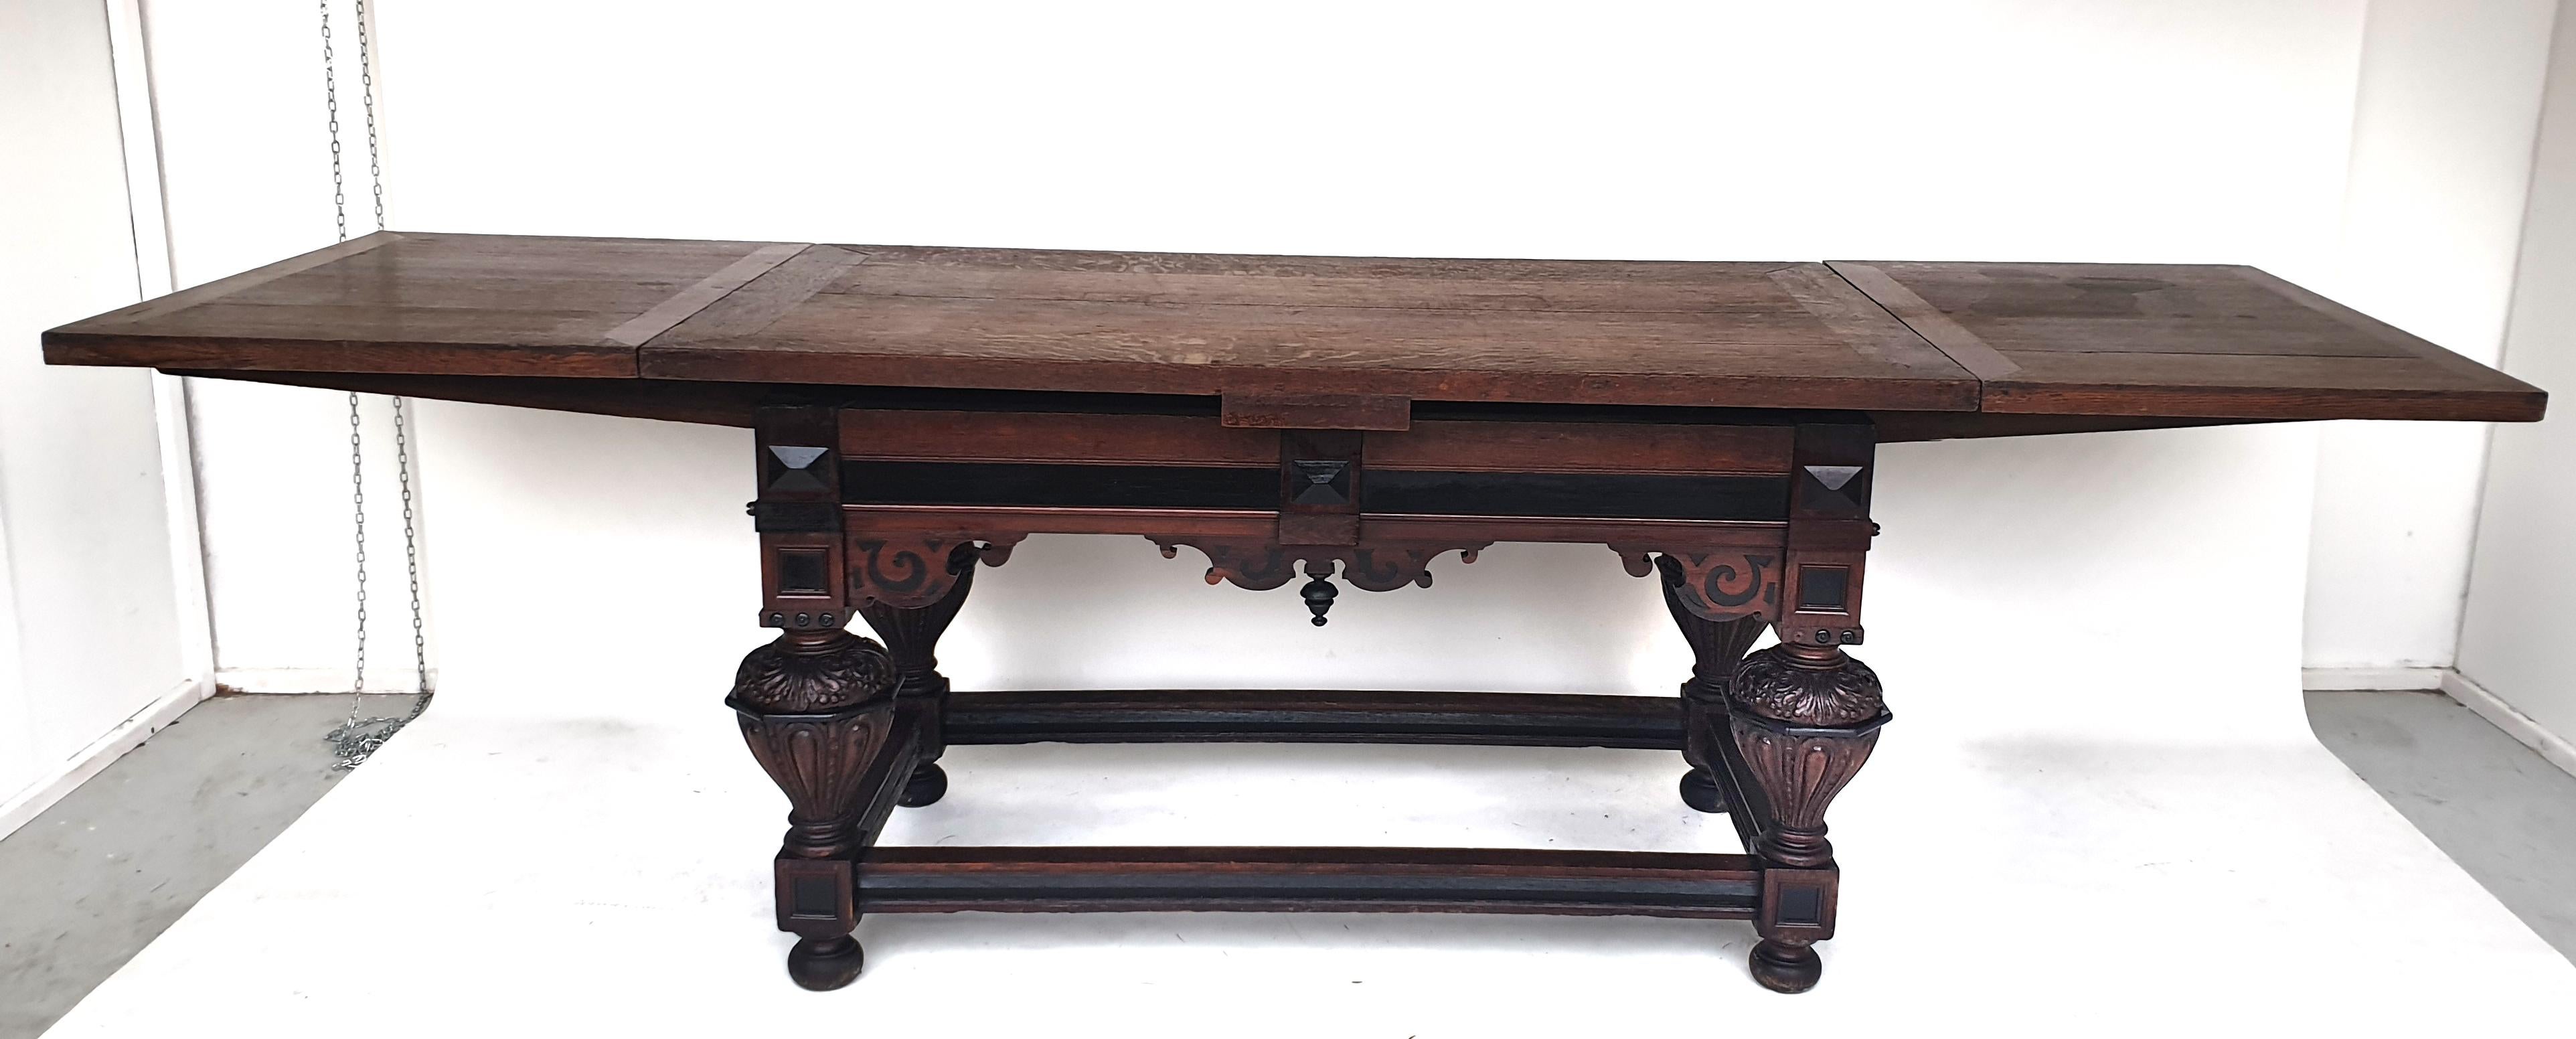 Baroque extending table, Frisia, 1750s. Made of solid oak. 

Base frame with circumferential webs and ball feet. Mighty, richly designed baluster legs with relief carvings. Frame with elaborately designed, finely cut apron with diamonds. The table